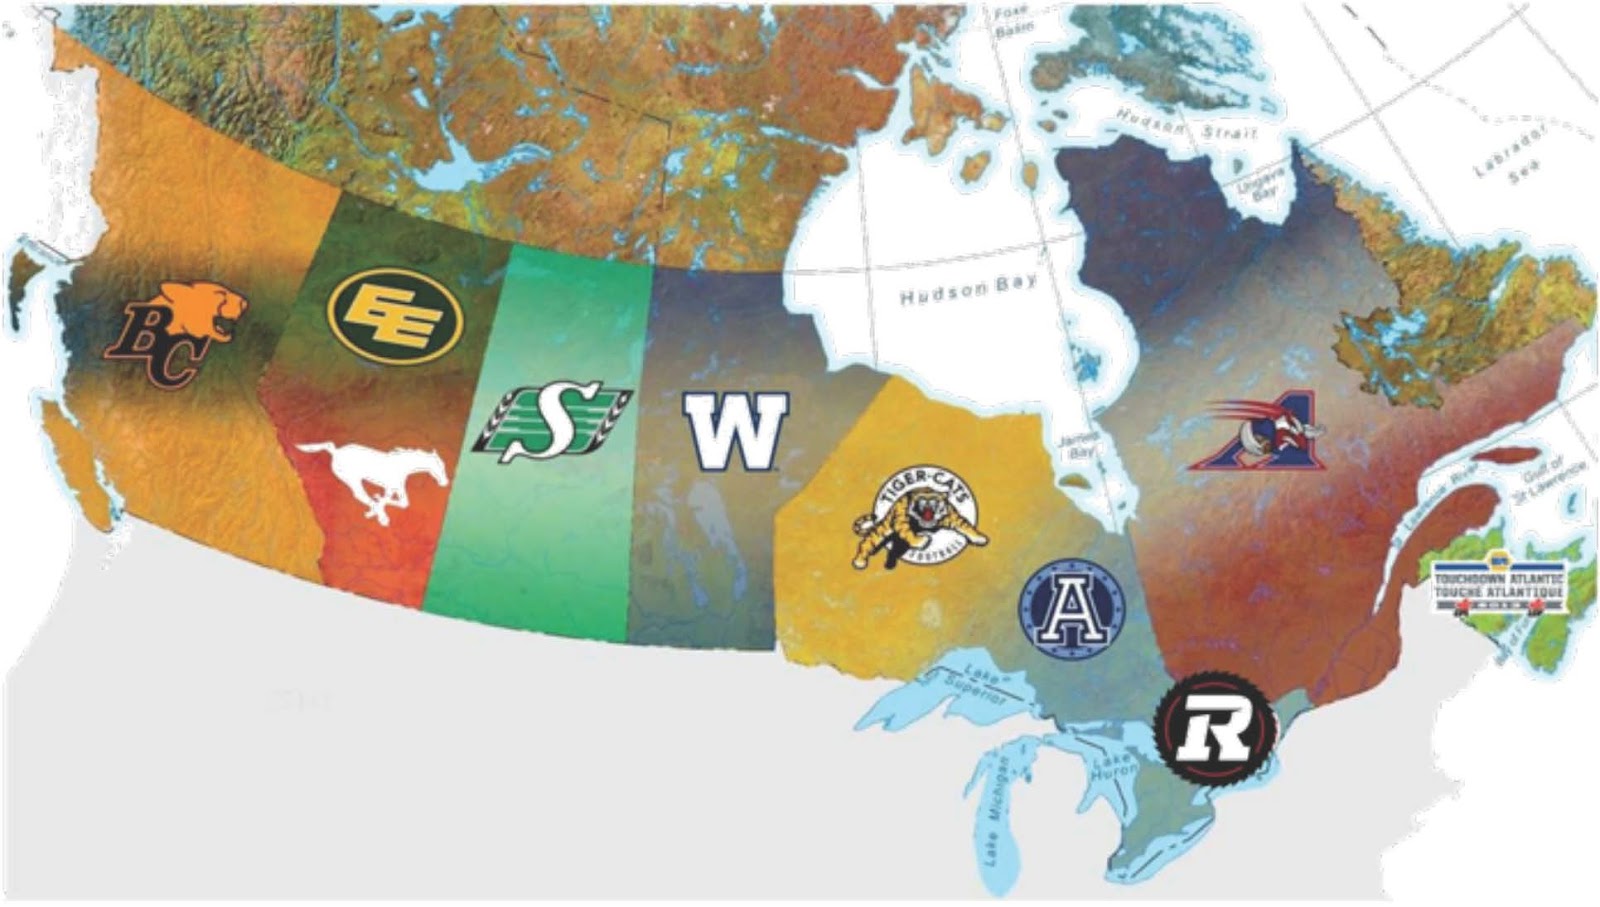 Next Major League Expansion Team Desired Expansion in the CFL